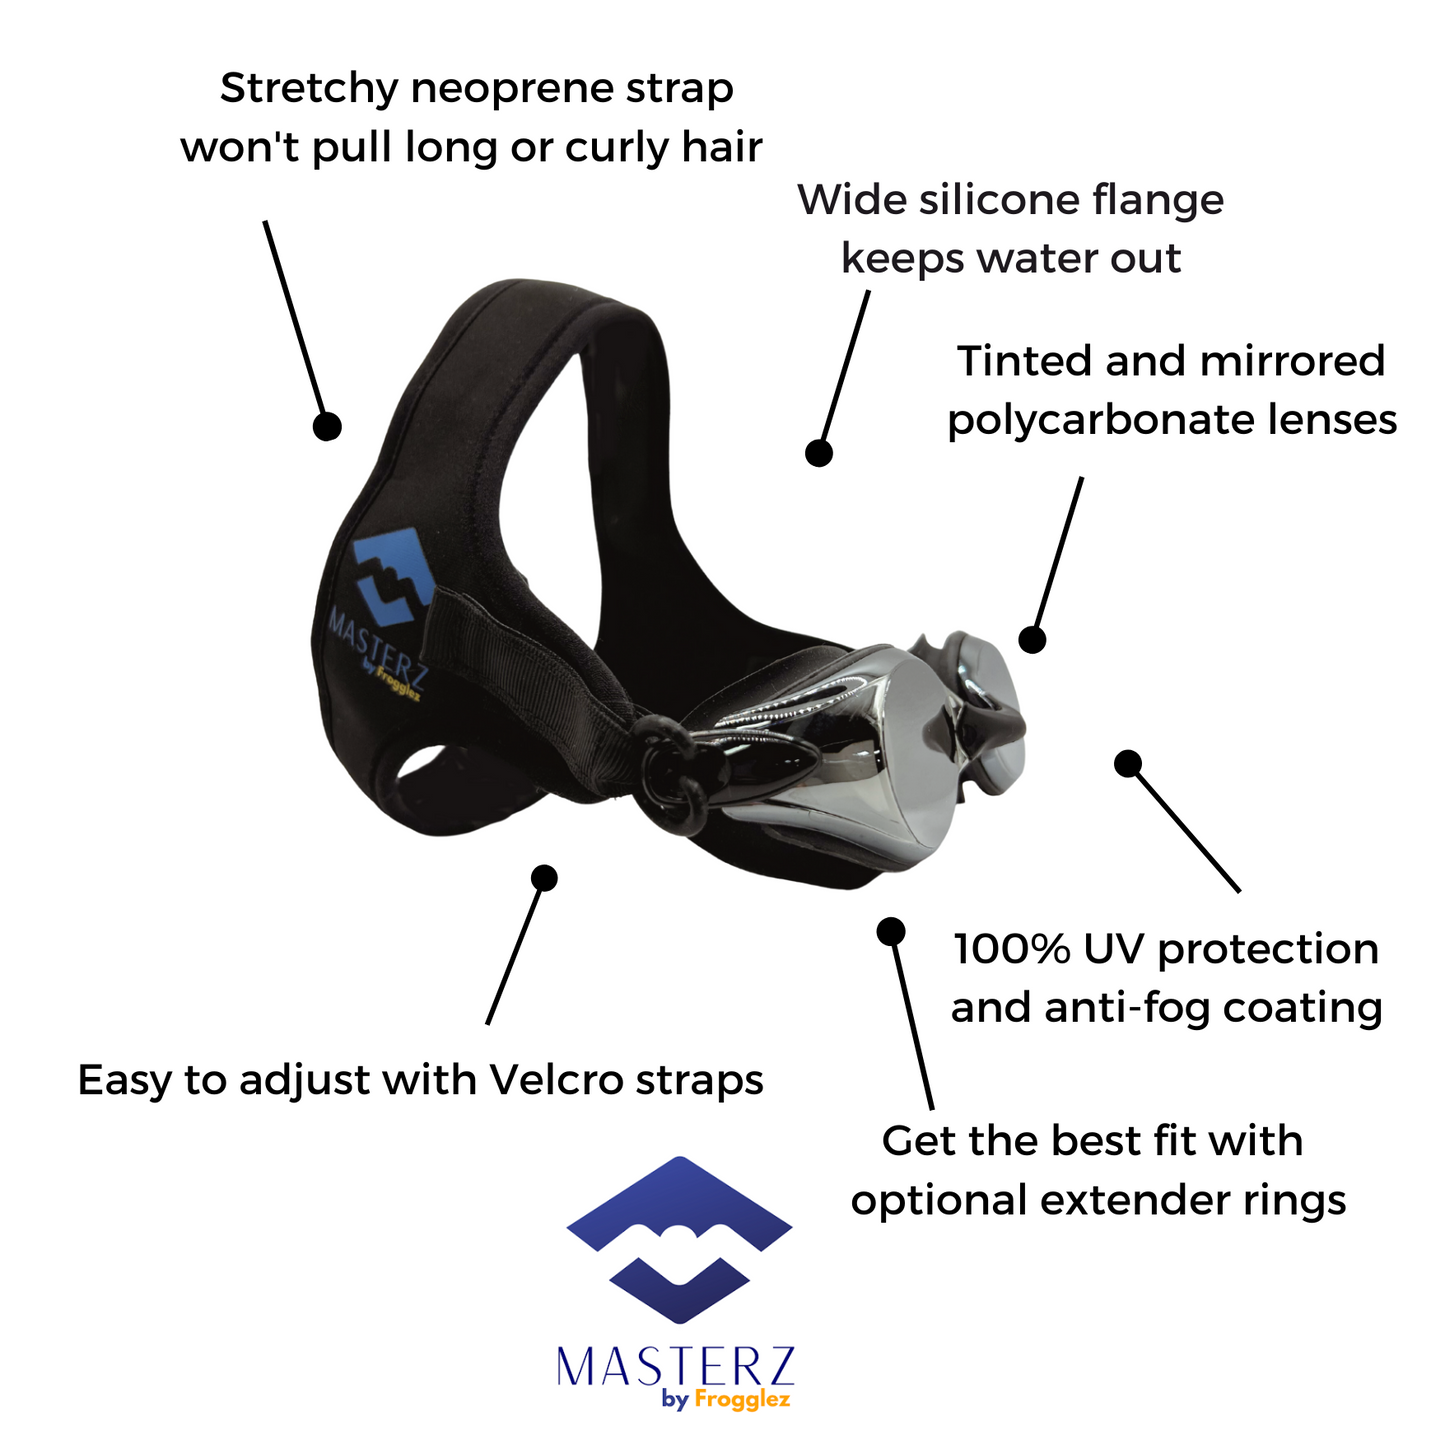 Diagram of Masterz by Frogglez. Text reads stretchy neoprene strap won’t pull long or curly hair. Wide silicone flange keeps water out. Tinted and mirrored polycarbonate lenses. 100% UV protection and anti-fog coating. Get the best fit with optional extender rings. Easy to adjust with Velcro straps